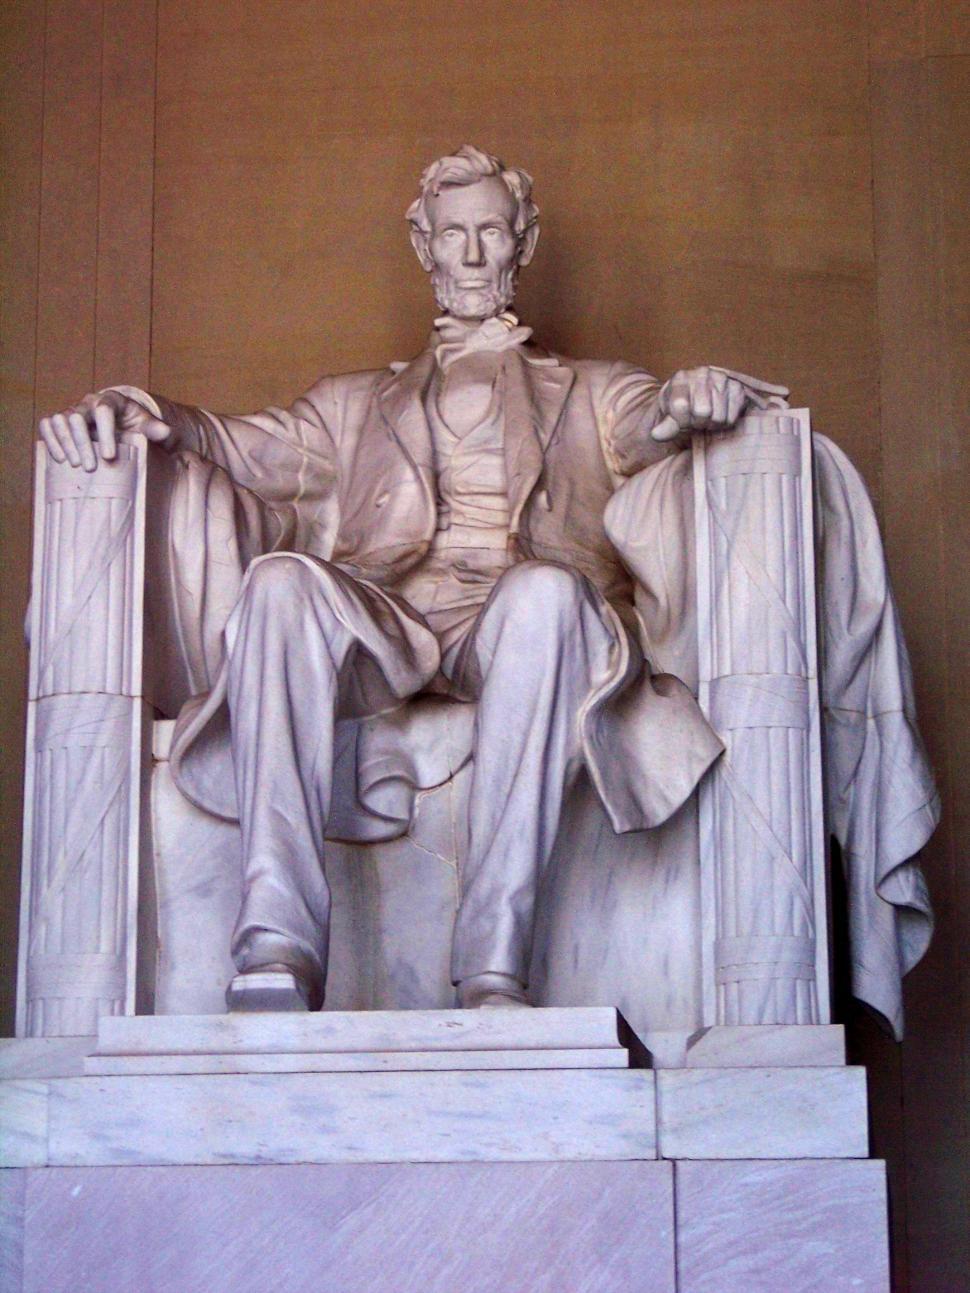 Free Image of Lincoln Memorial in Washington, D.C., United States 